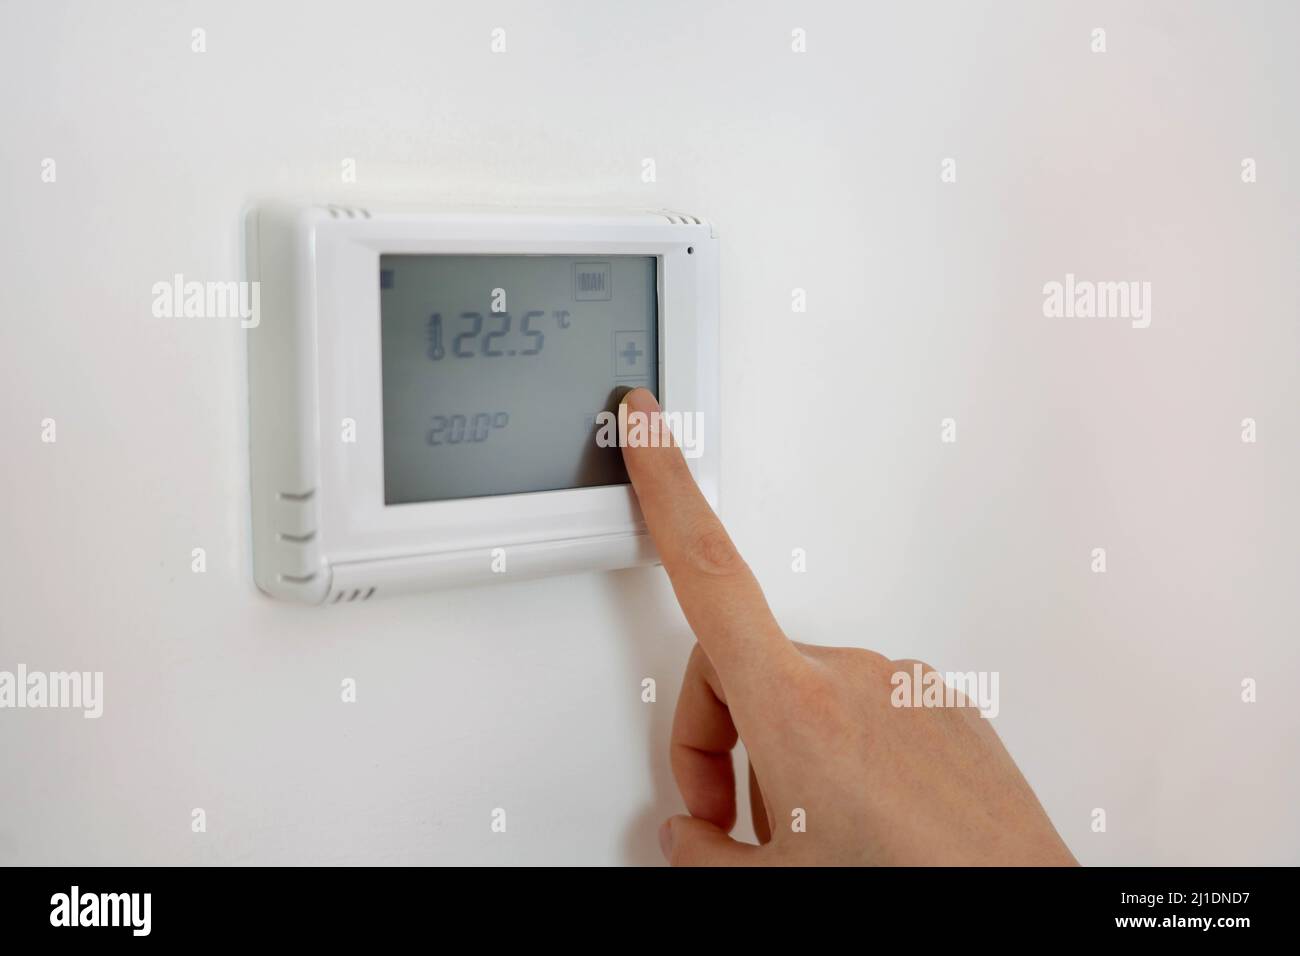 Lowering the temperature for energy saving. Human hand adjusting digital central heating thermostat at home. Stock Photo